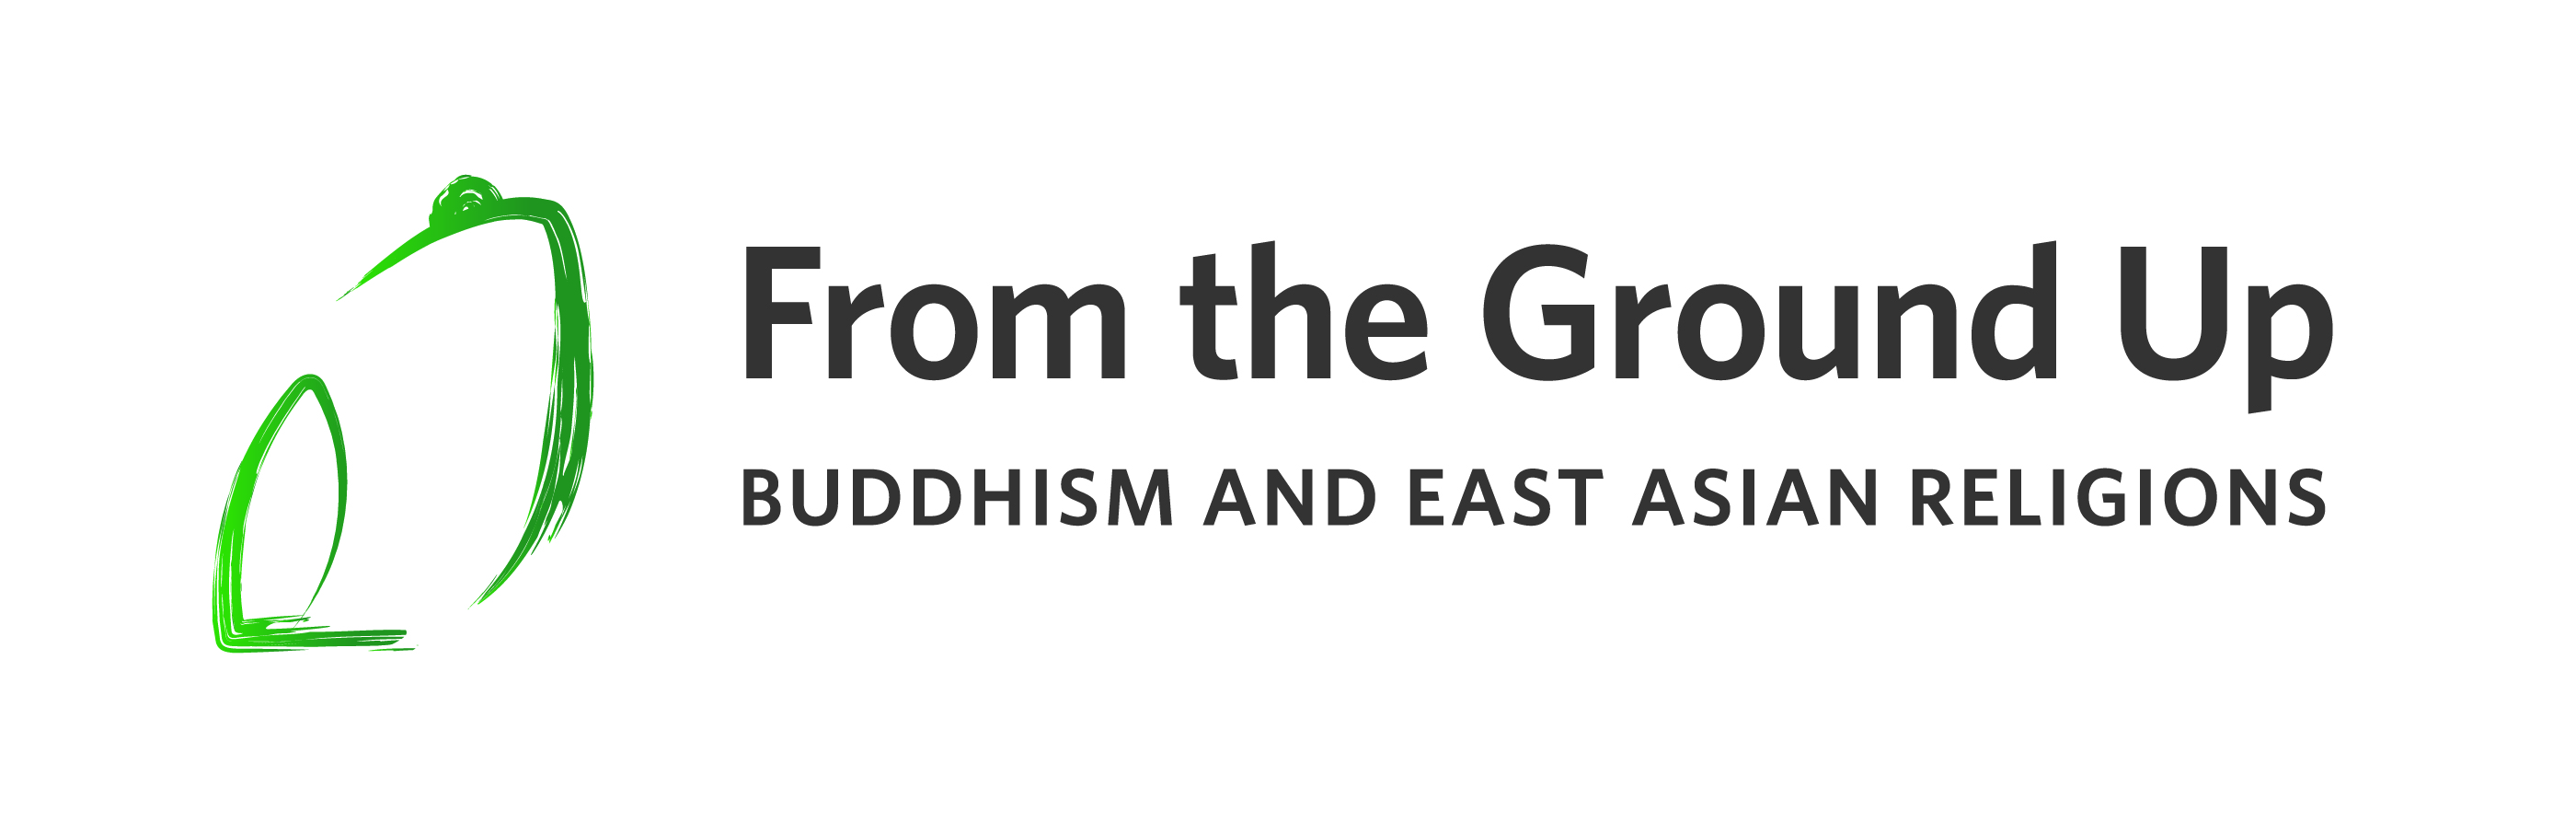 Frogbear - From the Ground Up: Buddhism & East Asian Religions